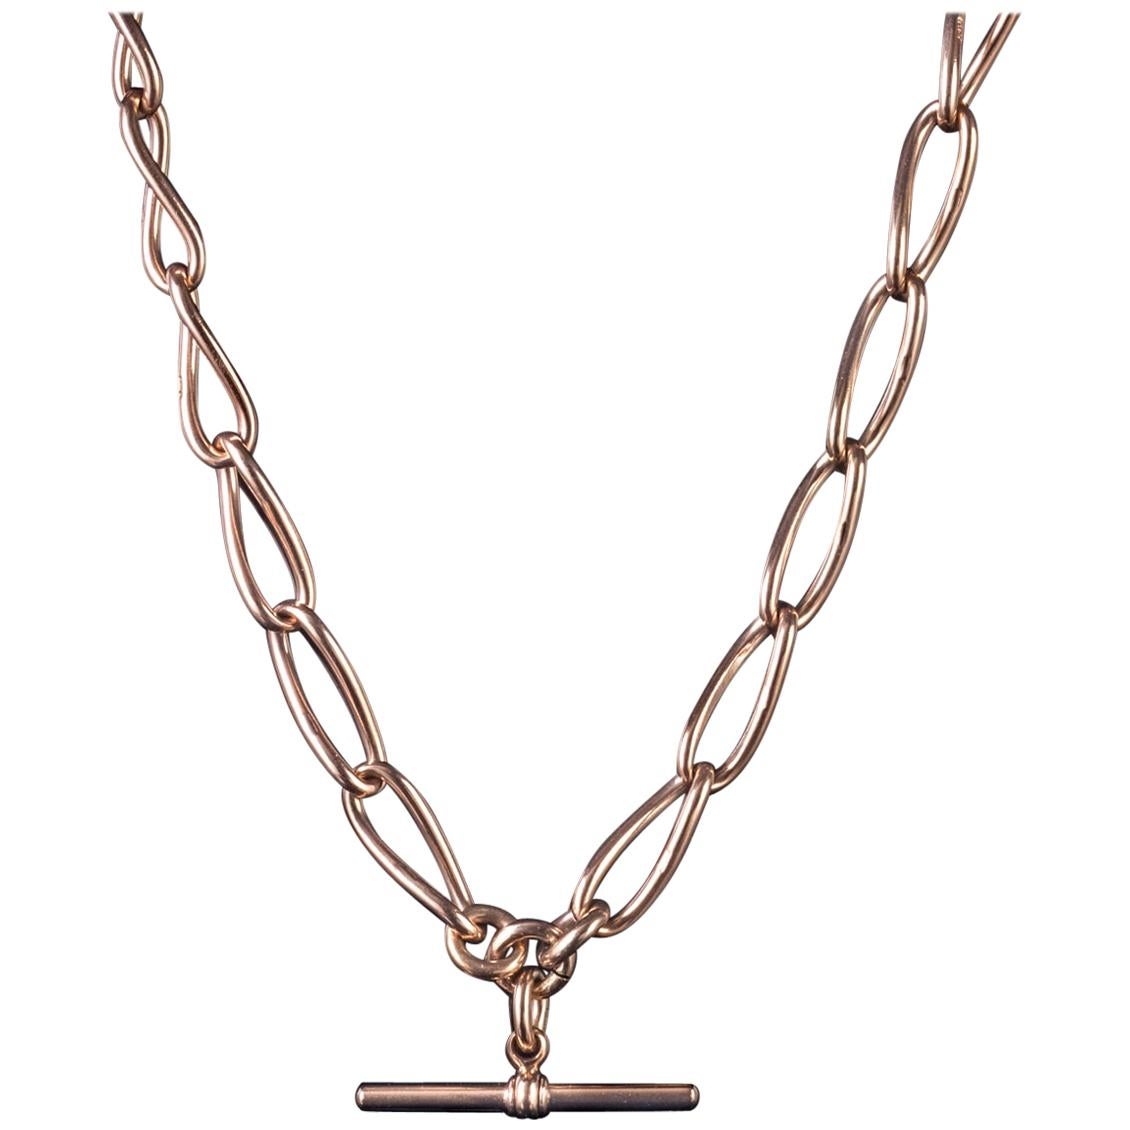 Antique Victorian Albert Chain 9 Carat Rose Gold Link Necklace, circa 1900 For Sale